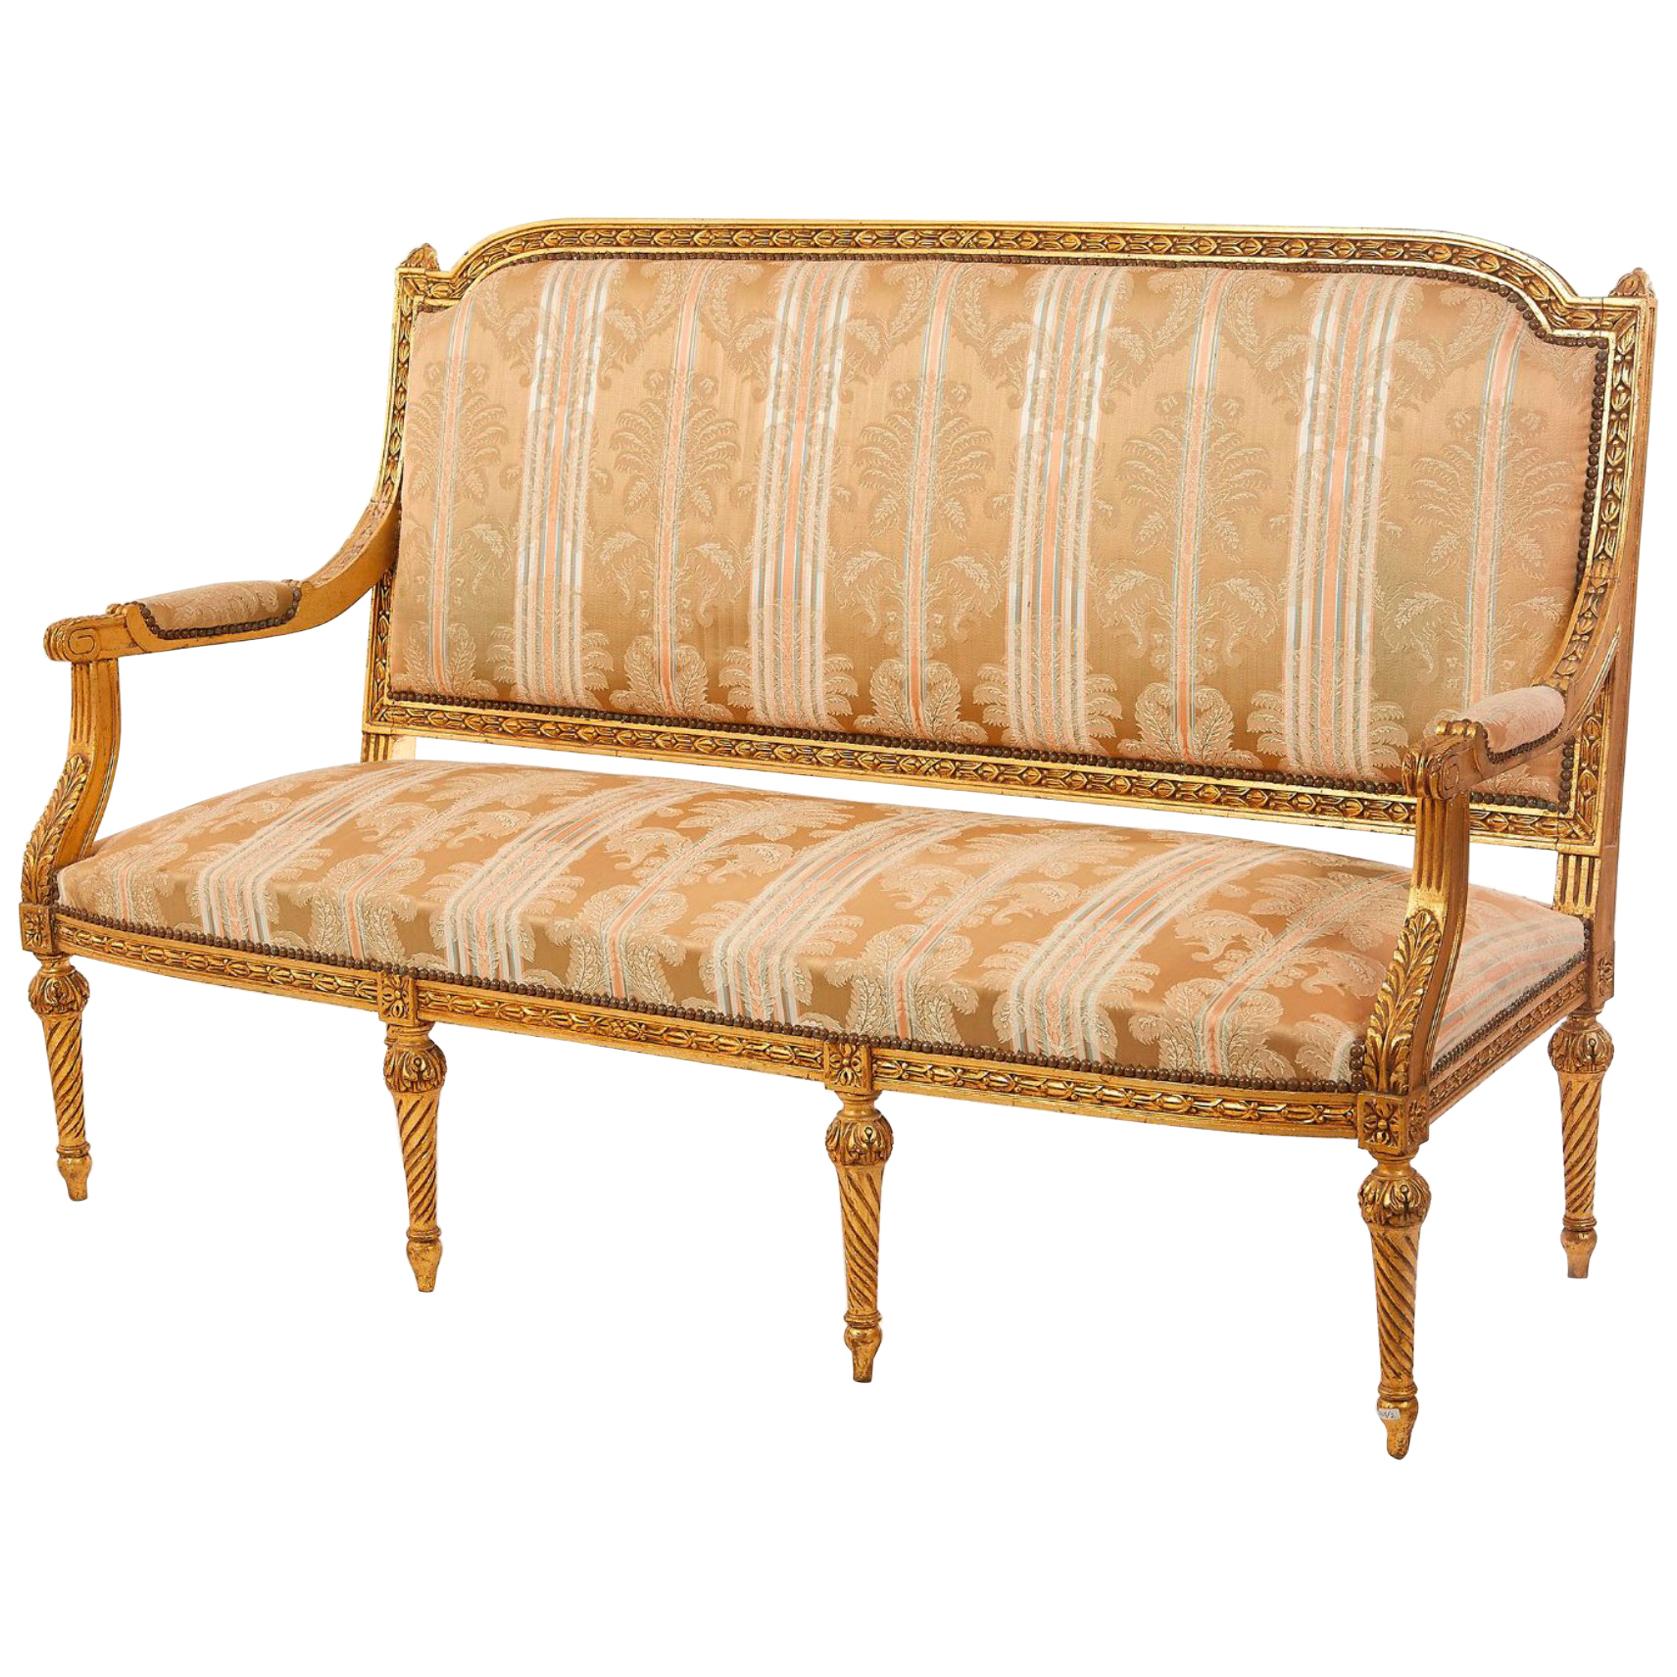 19th Century French Gilded Wooden Canape in Louis XVI Style For Sale